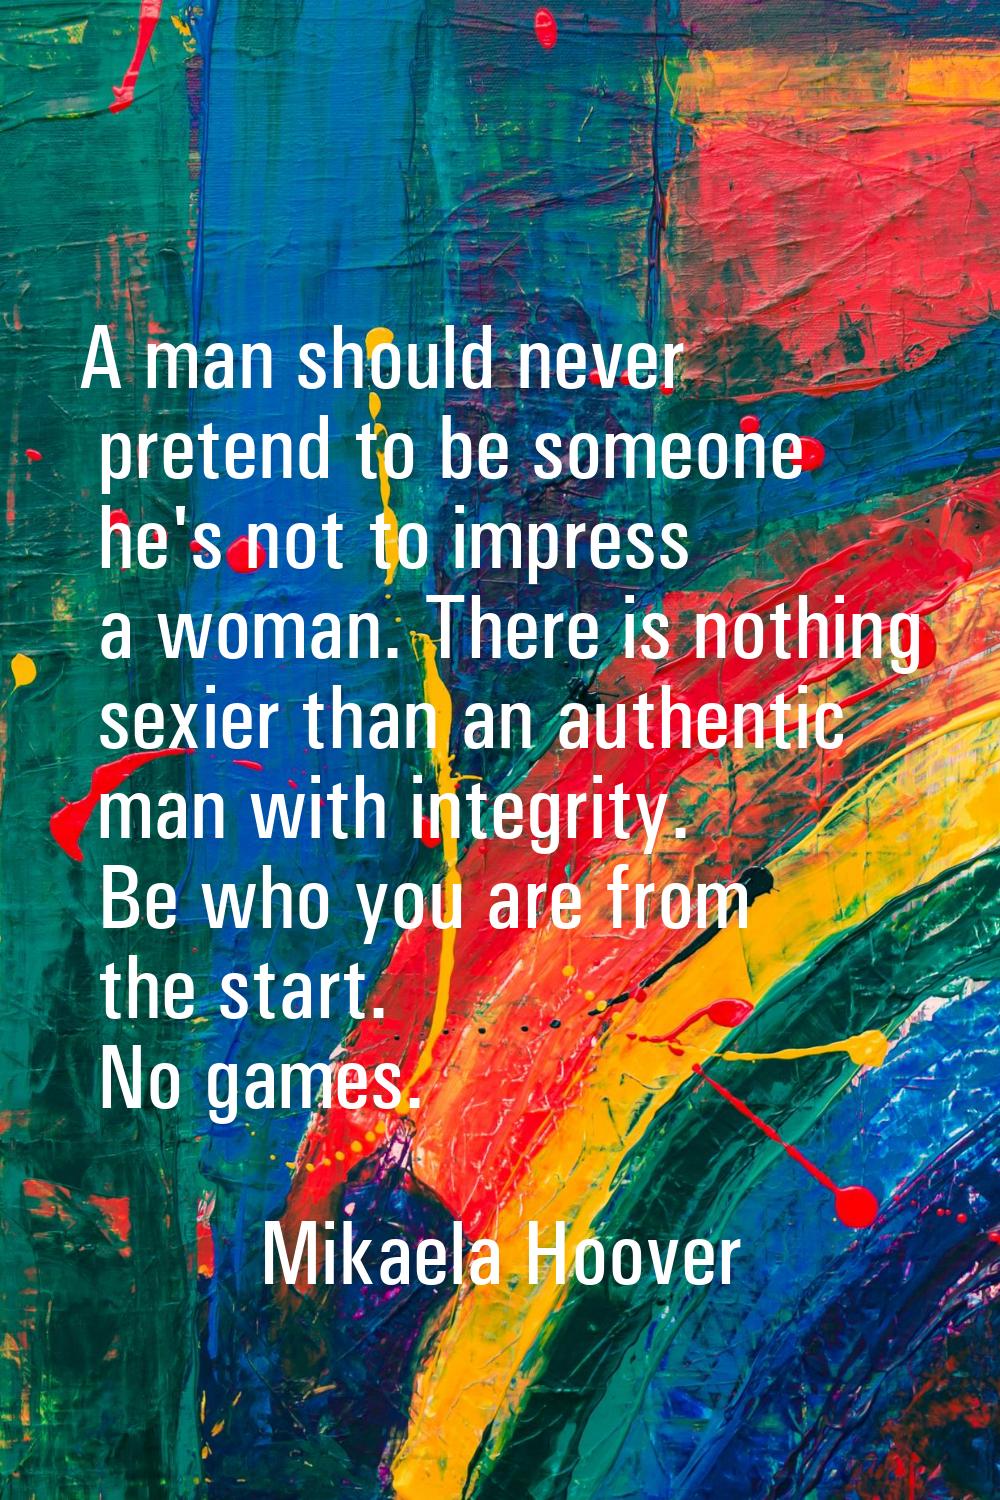 A man should never pretend to be someone he's not to impress a woman. There is nothing sexier than 